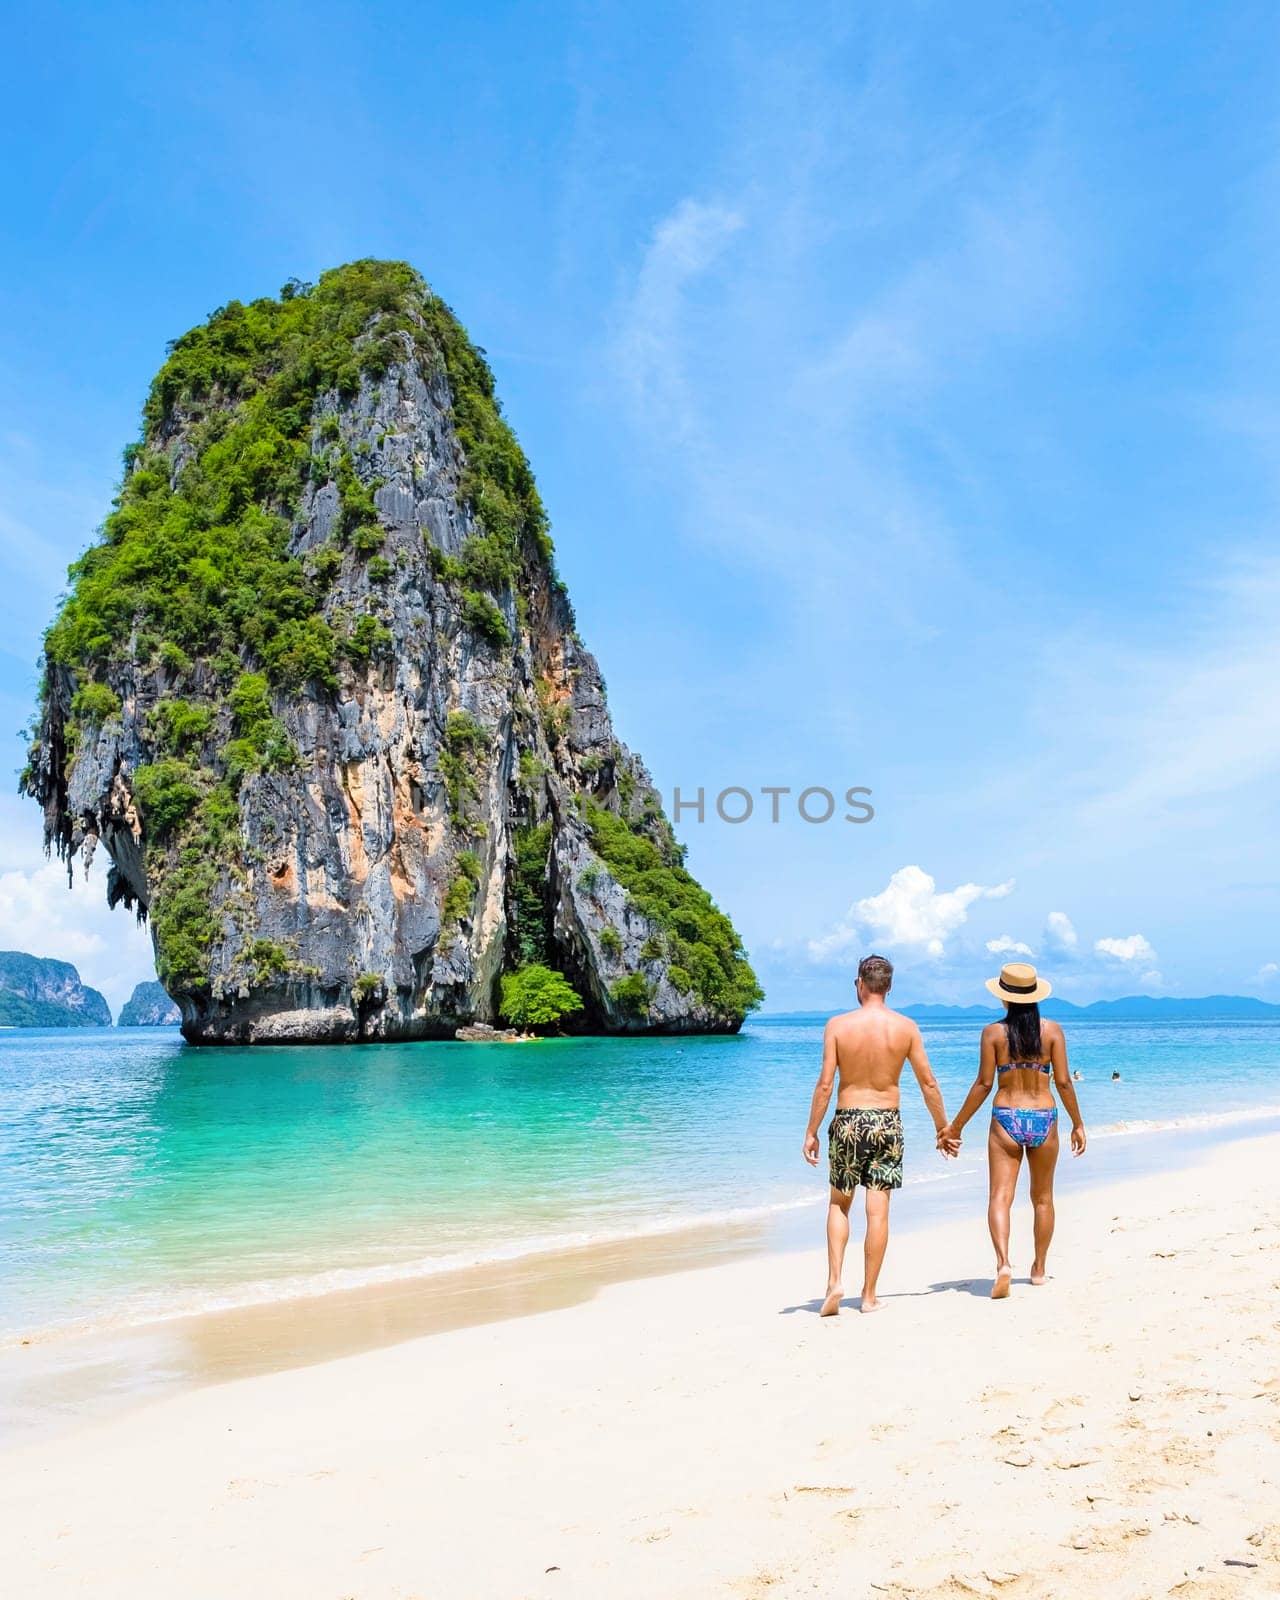 Railay Beach Krabi Thailand, a couple of men and woman on the beach in Thailand on a sunny day by fokkebok